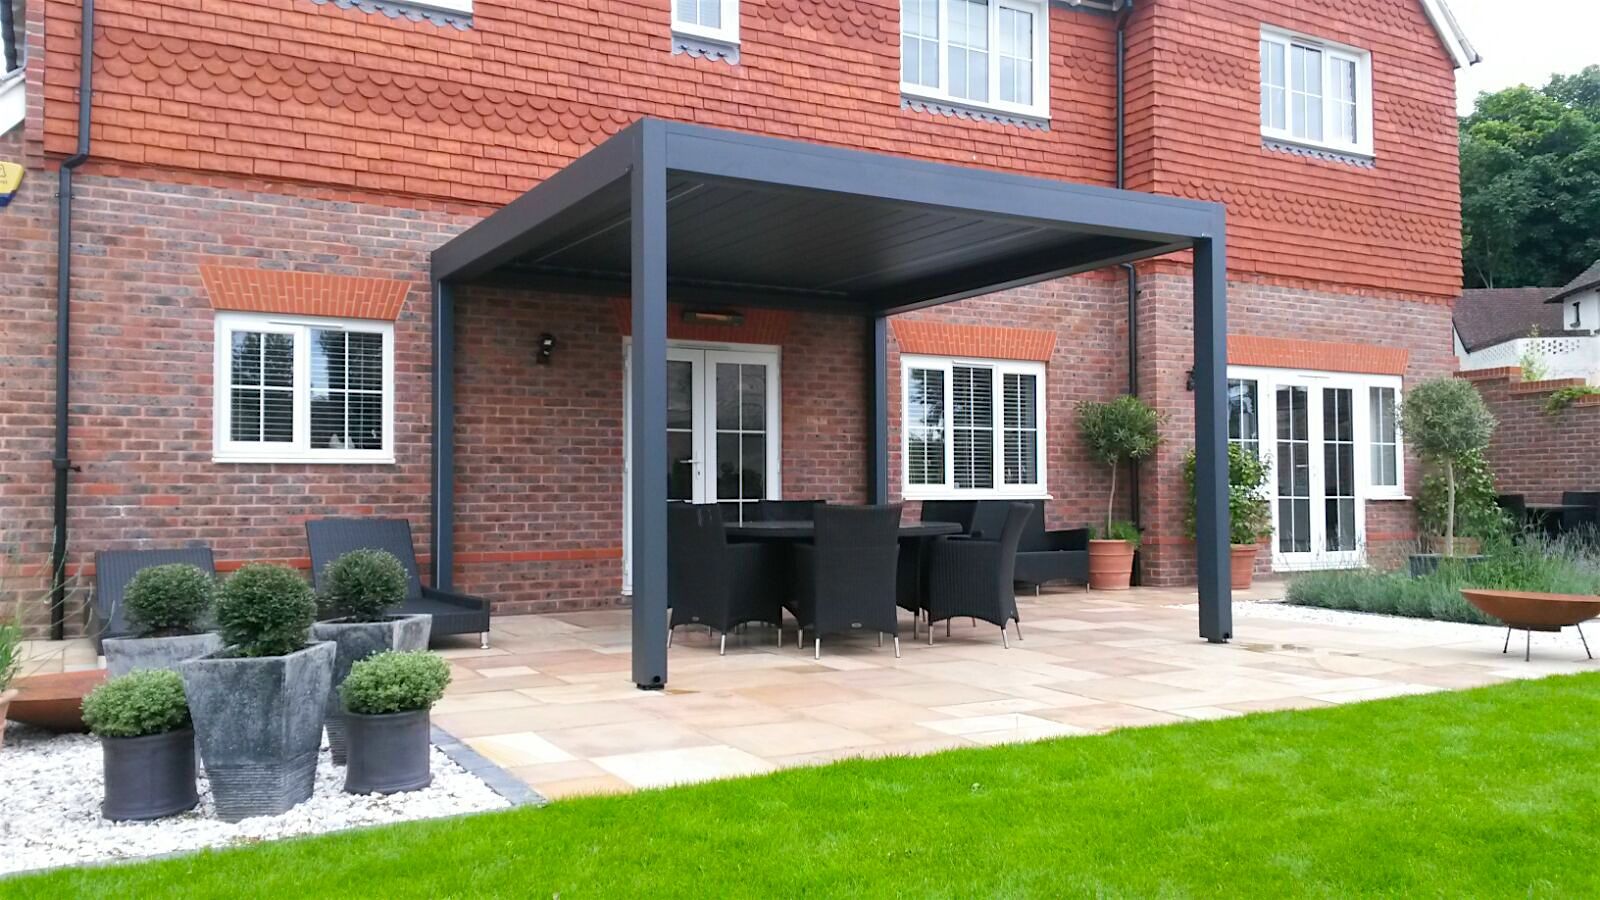 Outdoor Living Pod, Louvered Roof Patio Canopy Installation in Findon, West Sussex. homify Moderne tuinen outdoor living pod,louvered,roof,patio,terrace,canopy,garden,room